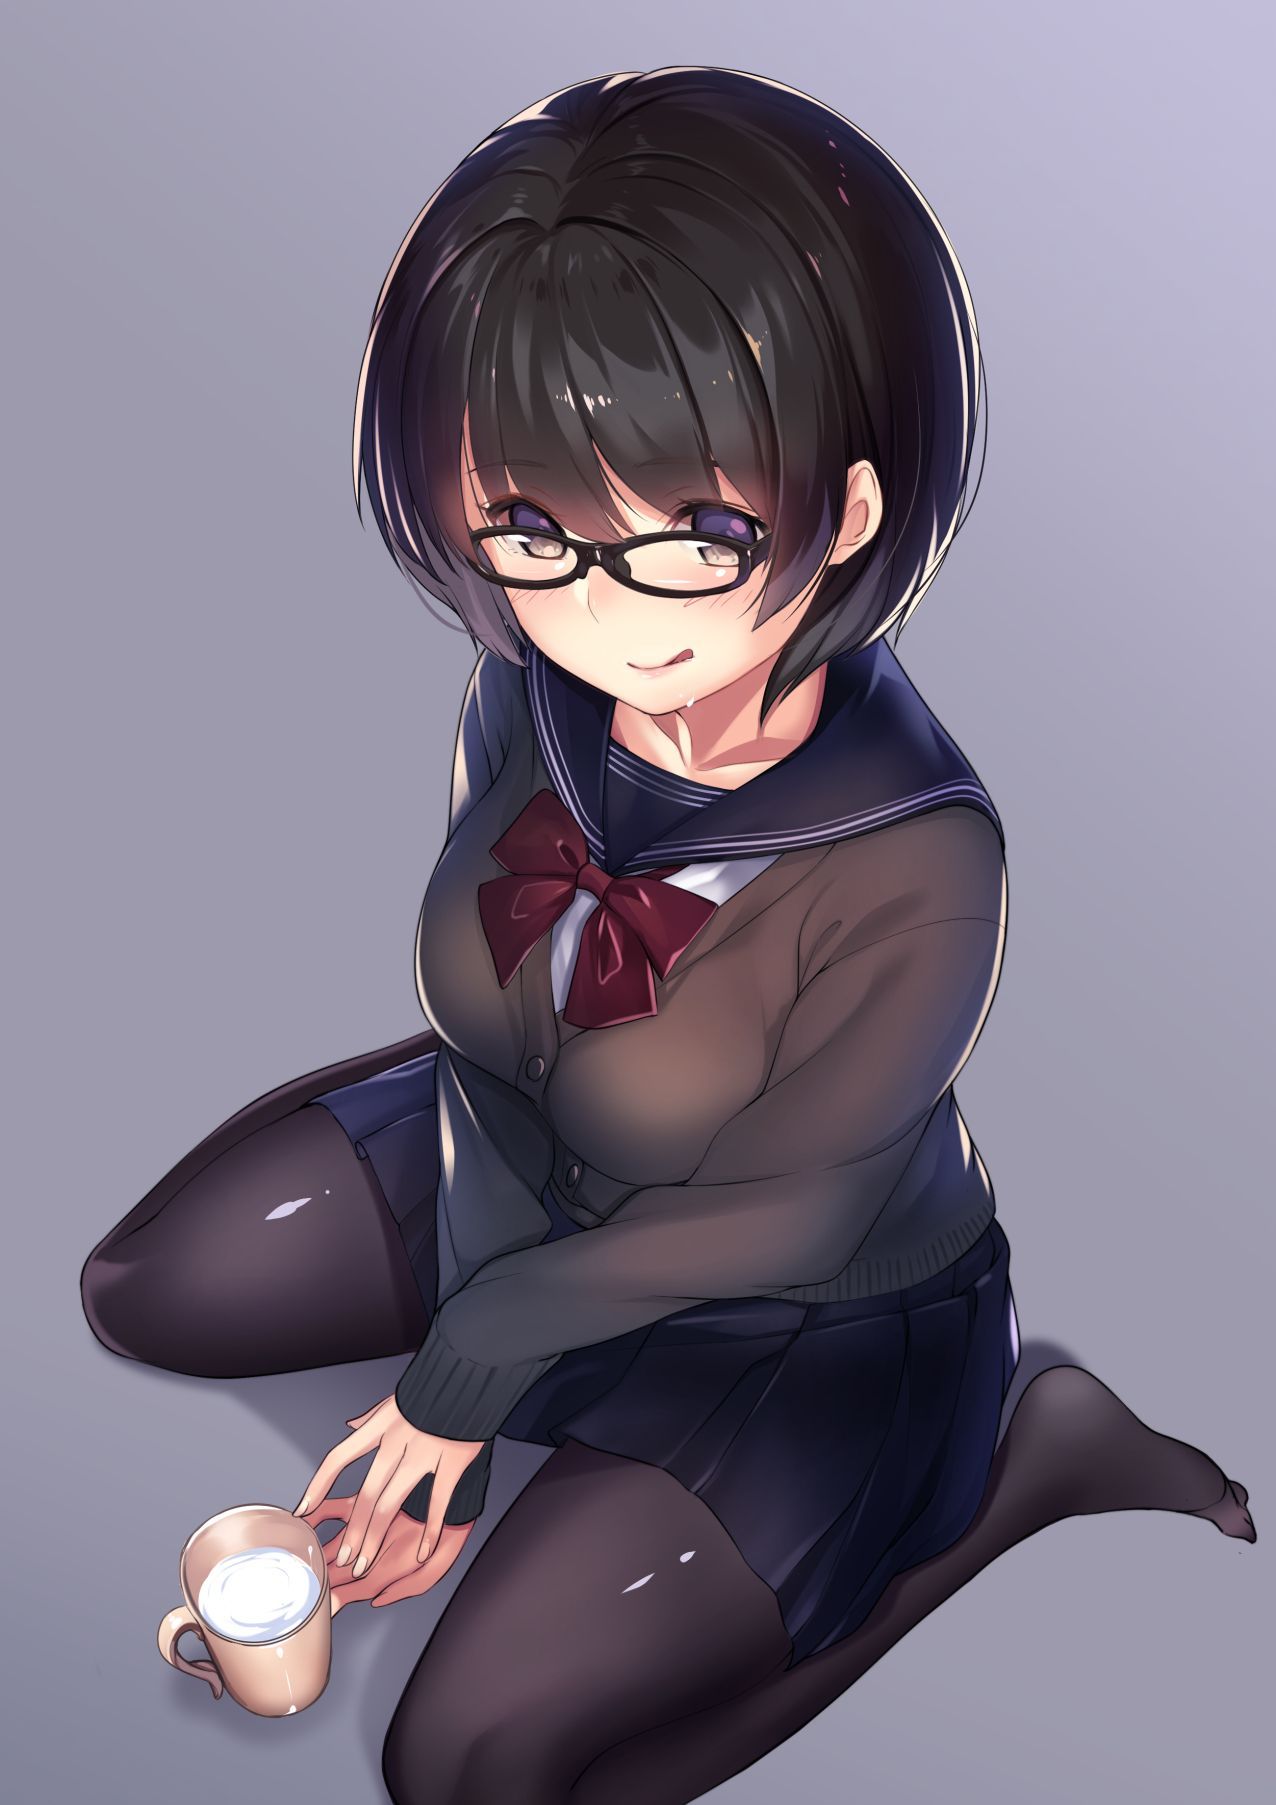 [2nd] Cute Glasses Daughter Secondary Image Part 45 [Glasses Daughter Non-Erotic] 4